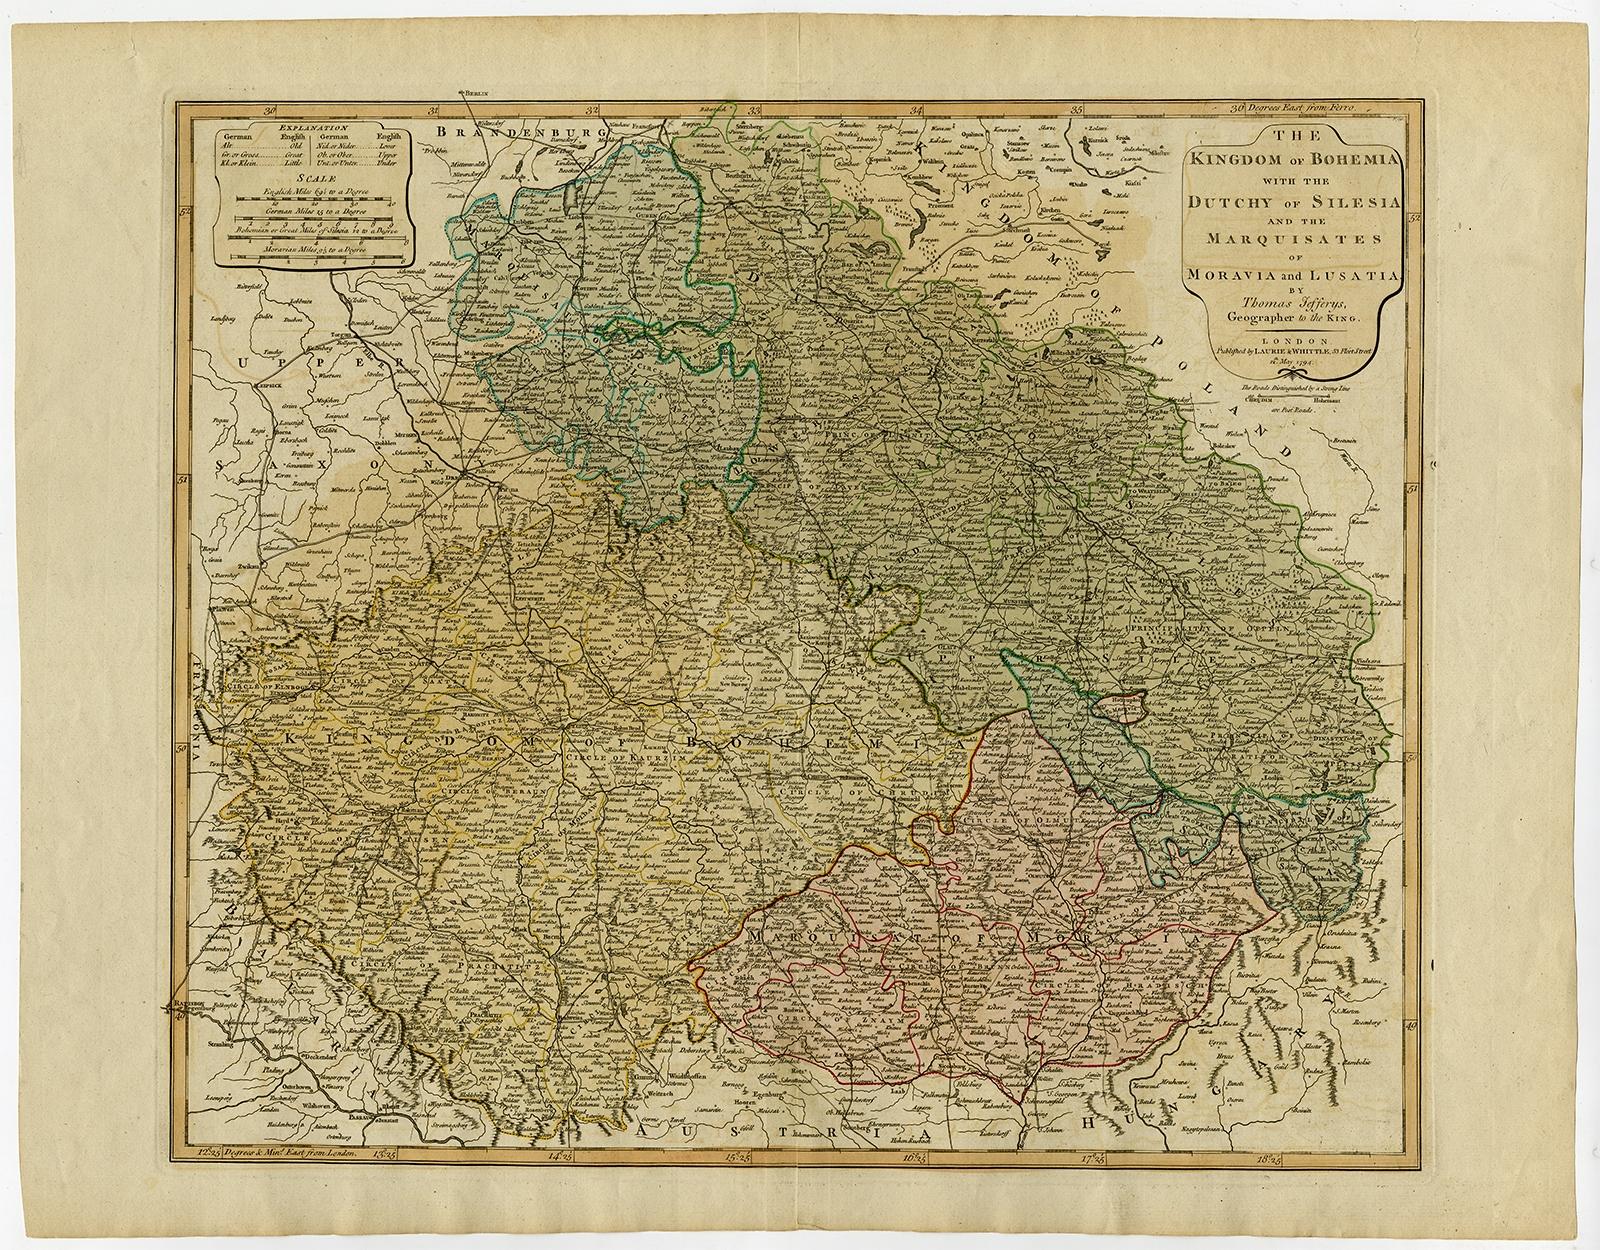 Antique map titled 'The Kingdom of Bohemia with the Duchy of Silesia and the Marquisates of Moravia and Lusatia.' 

Map of the Kingdom of Bohemia, with Silesia, Moravia and Lusatia. This map originates from 'A new universal atlas, exhibiting all